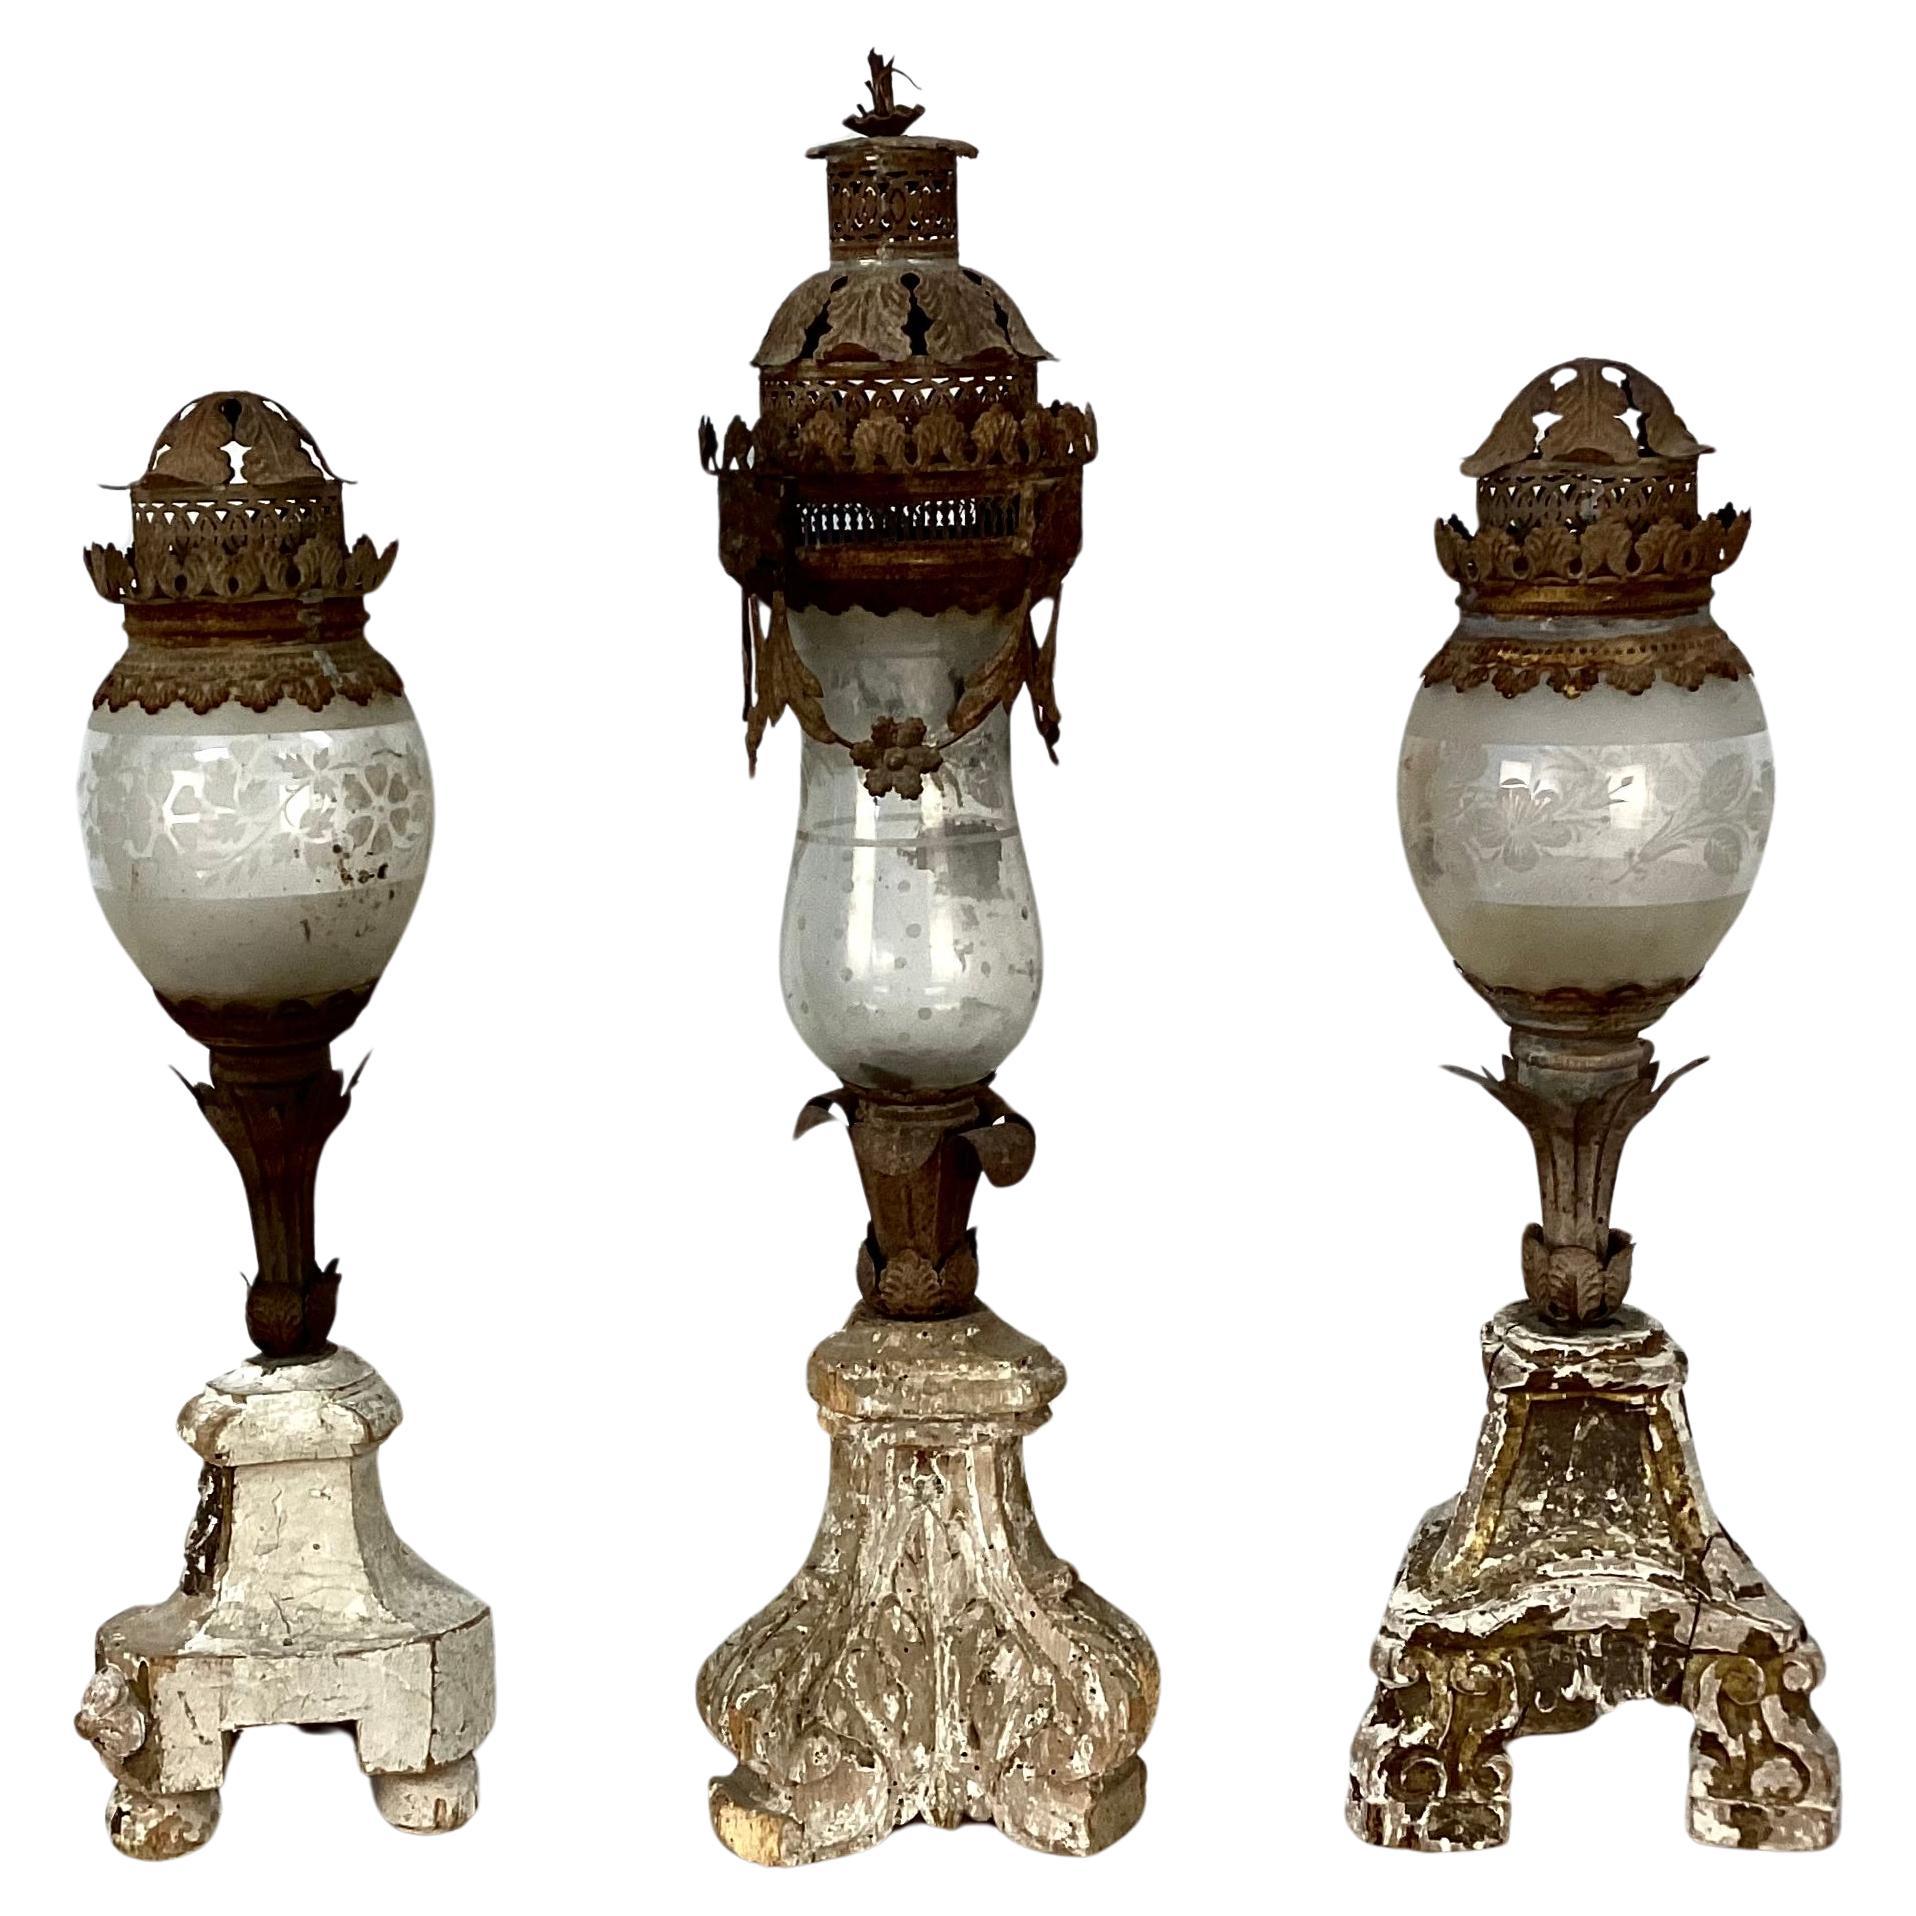 Set of three ornate 18th century giltwood and tole lanterns. Lanterns are of three sizes, each having glass centers with frosted floral etching, ornate tole metal tops and bodies that resemble floral stems, all resting on giltwood ornate bases with